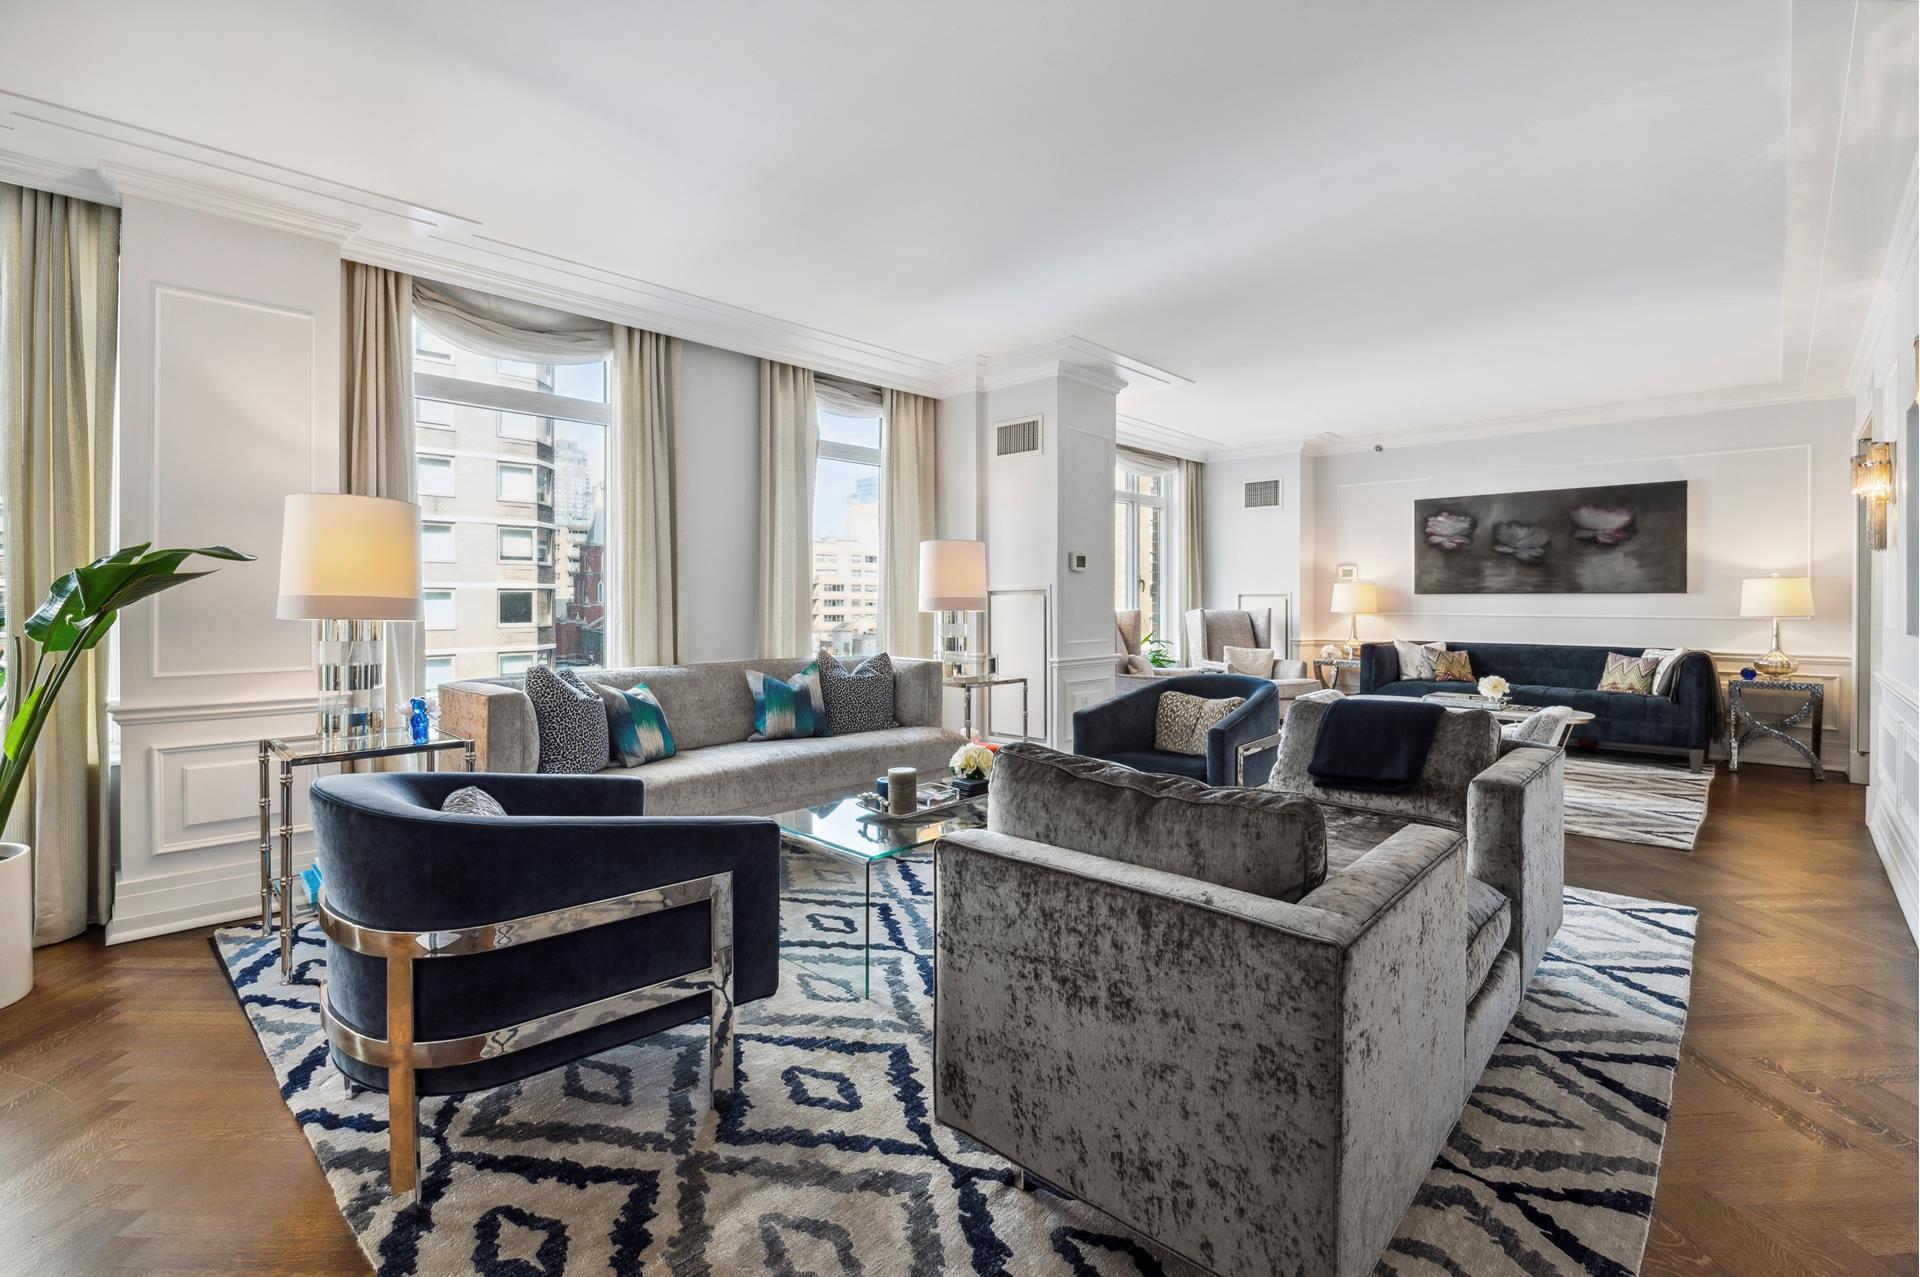 205 East 85th Street 8C, Yorkville, Upper East Side, NYC - 5 Bedrooms  
6.5 Bathrooms  
12 Rooms - 